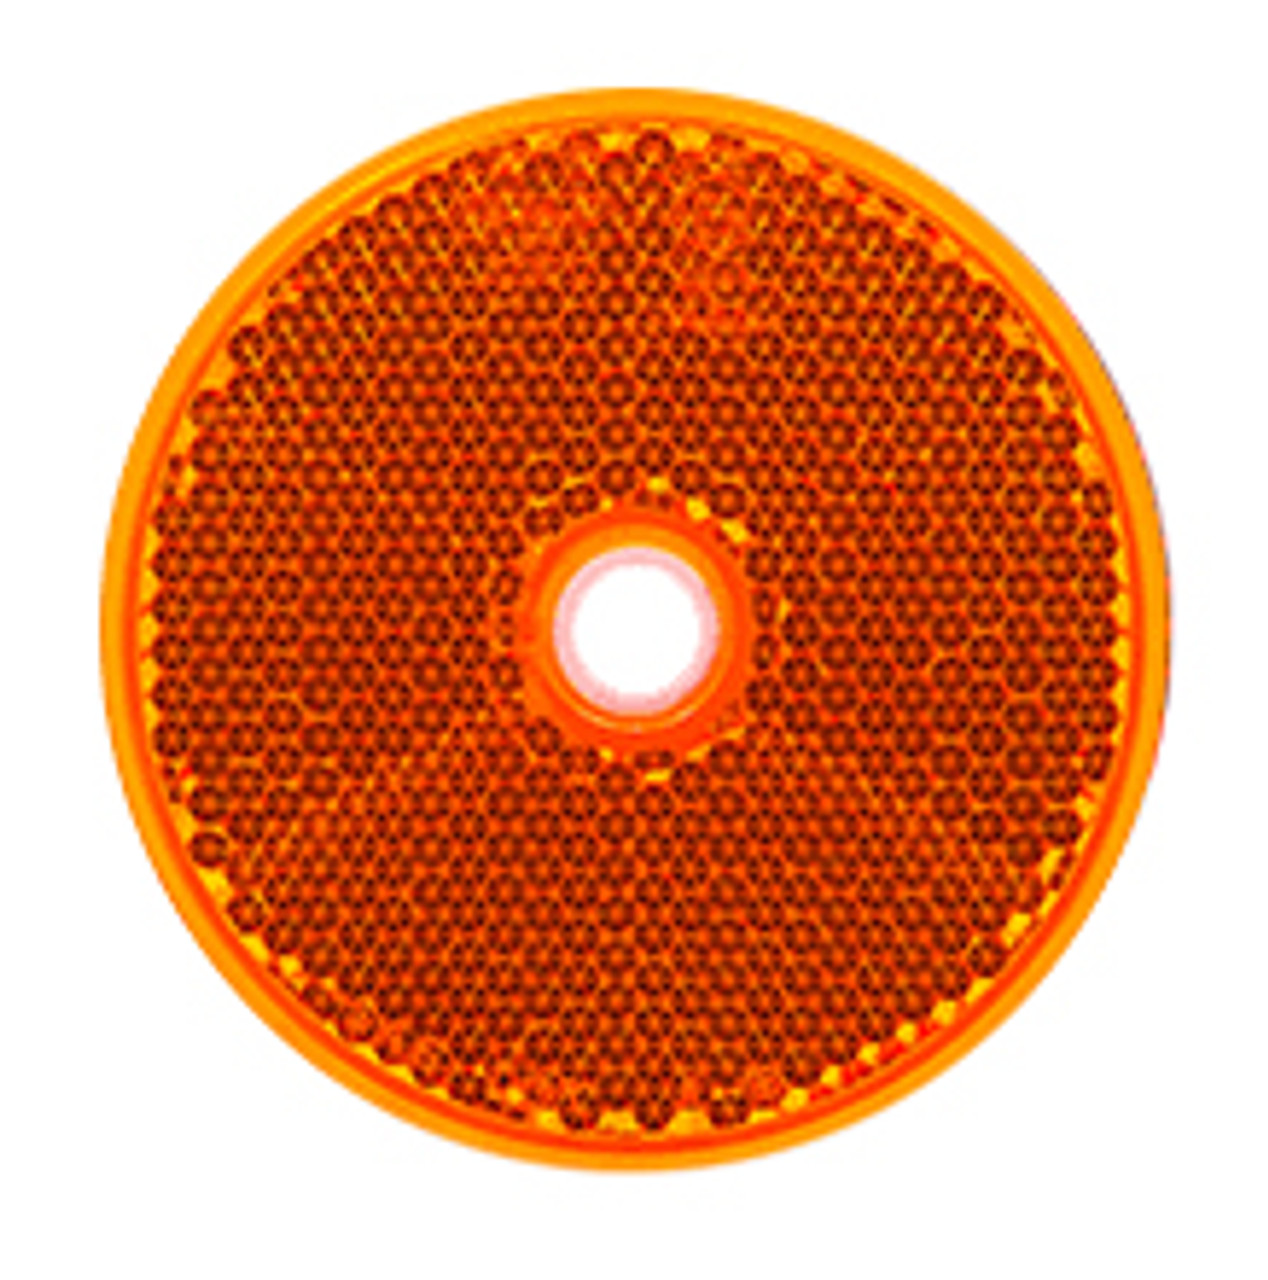 66A - Round Amber Reflex Reflector. Low Profile Design. Screw Mount. Premium Quality. ECE Approved. Autolamp. Ultimate LED. 